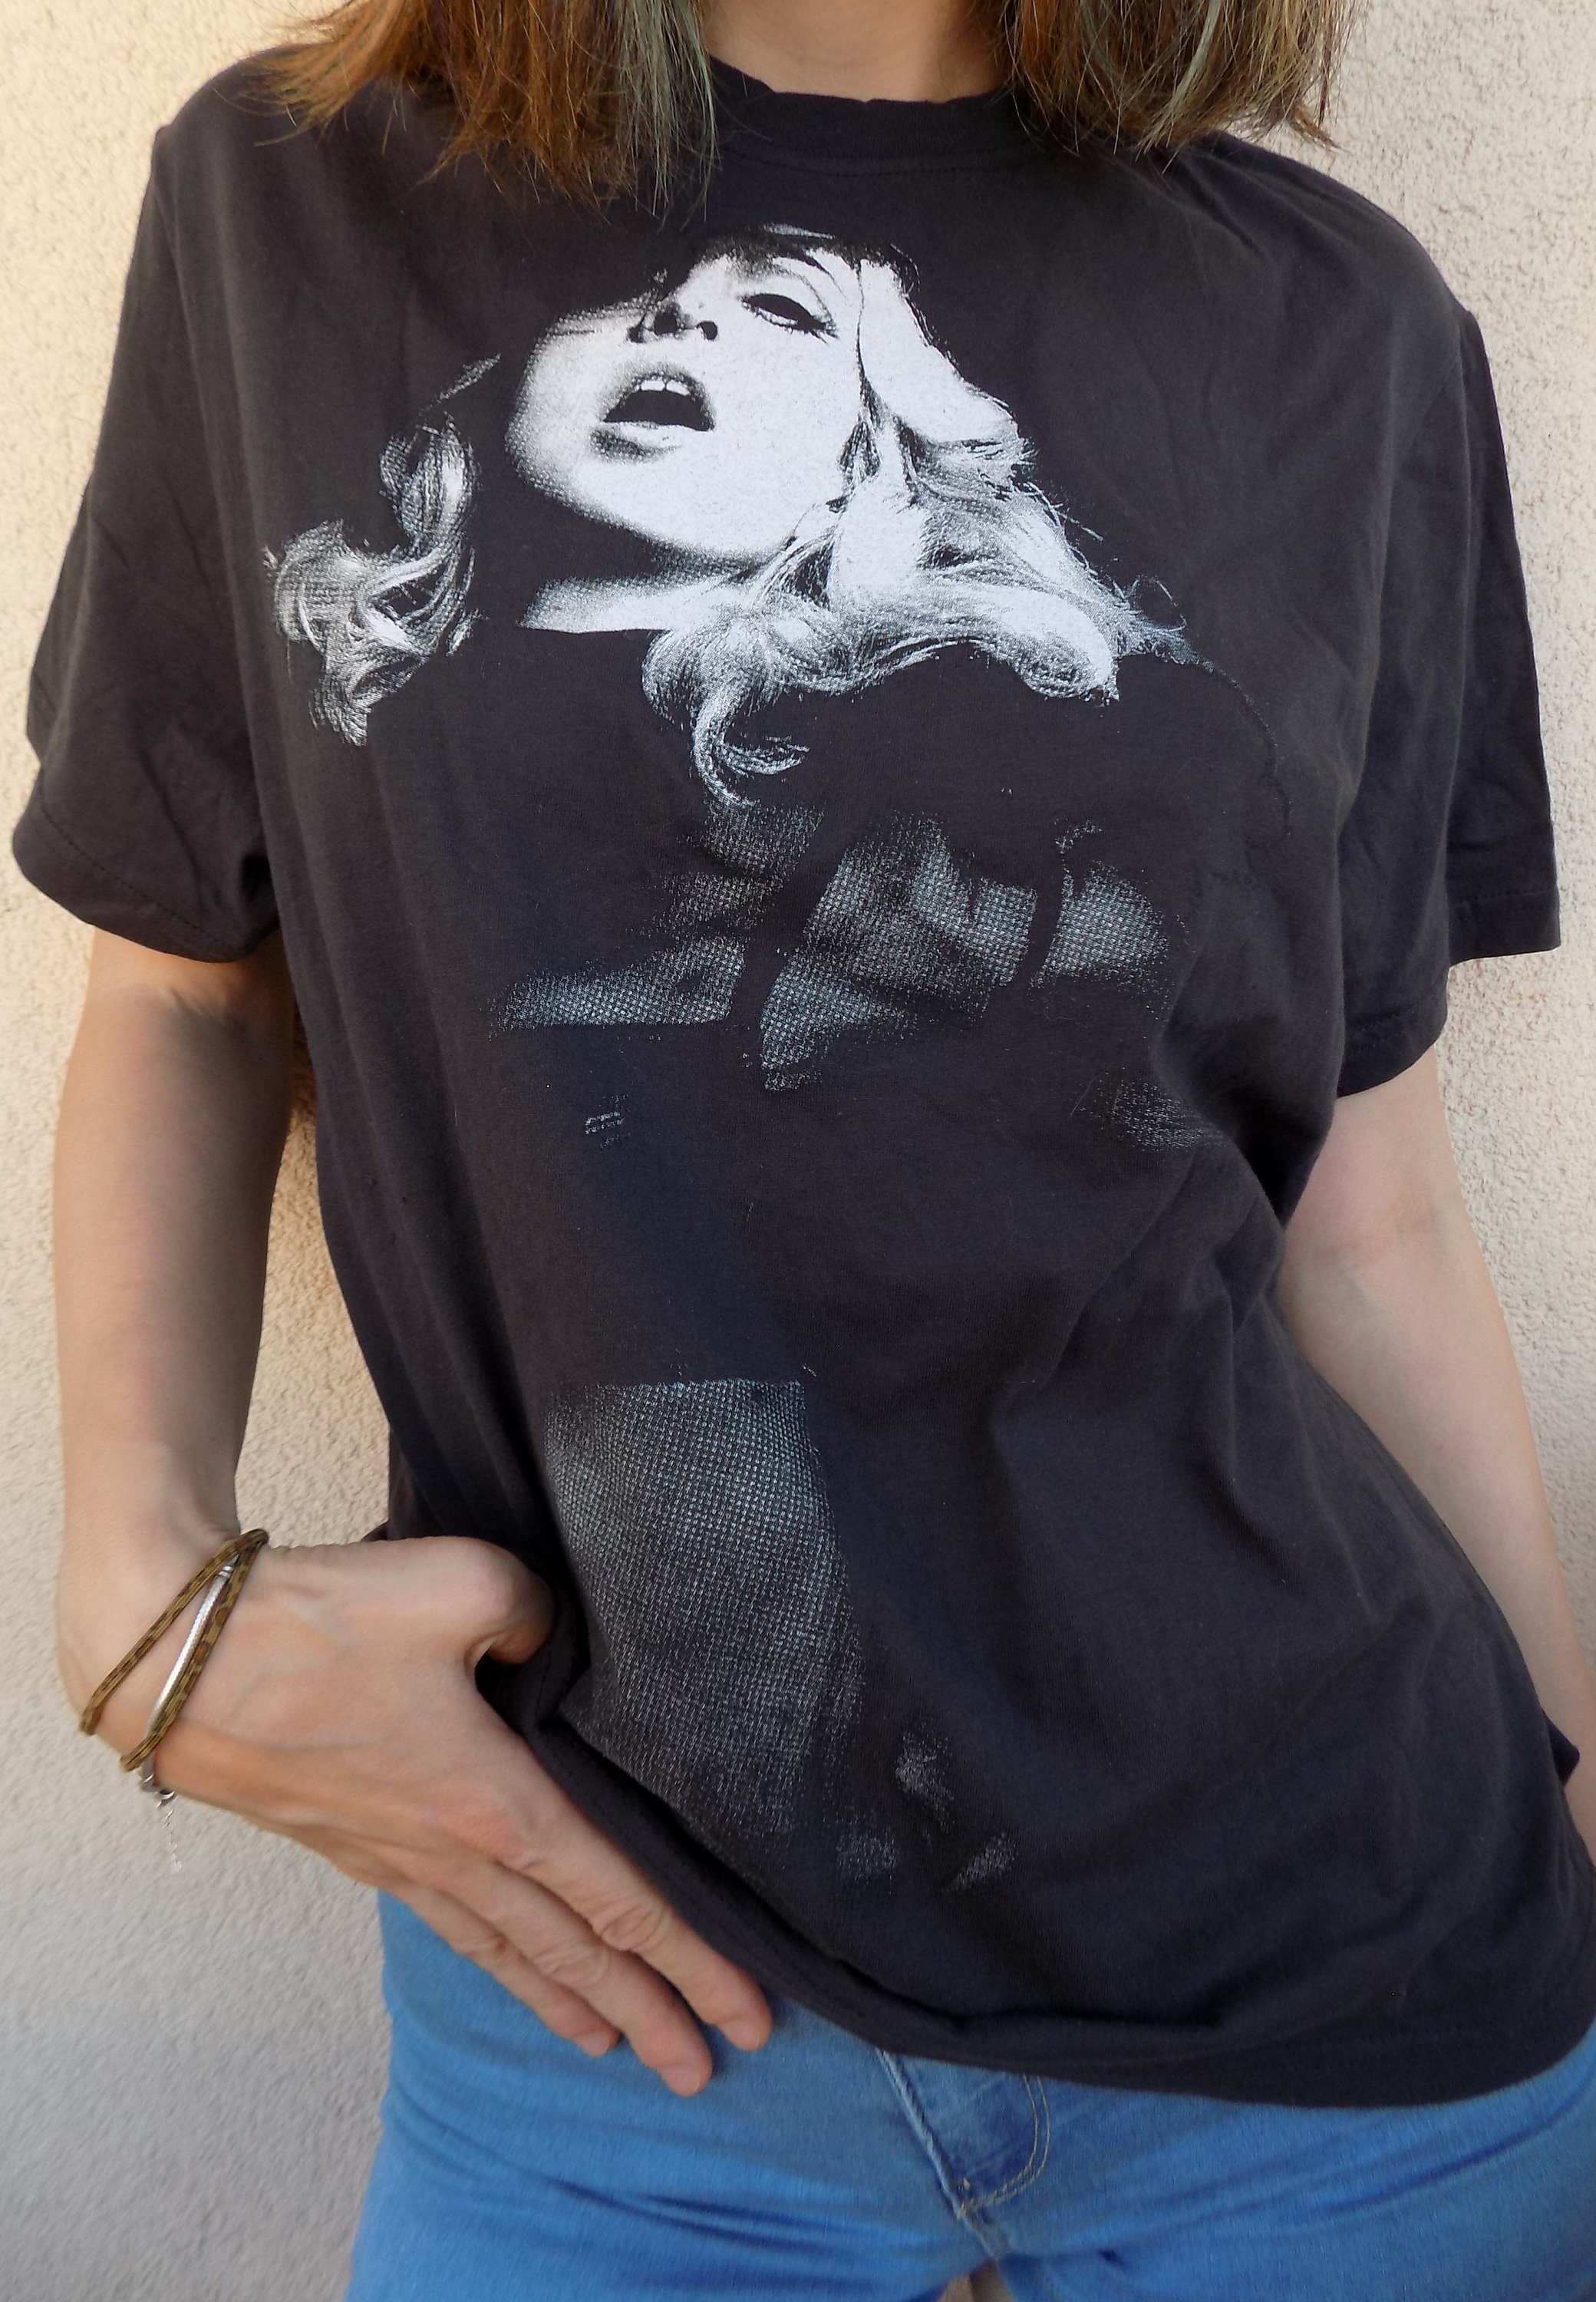 Madonna's Tour Two-Sided Shirt